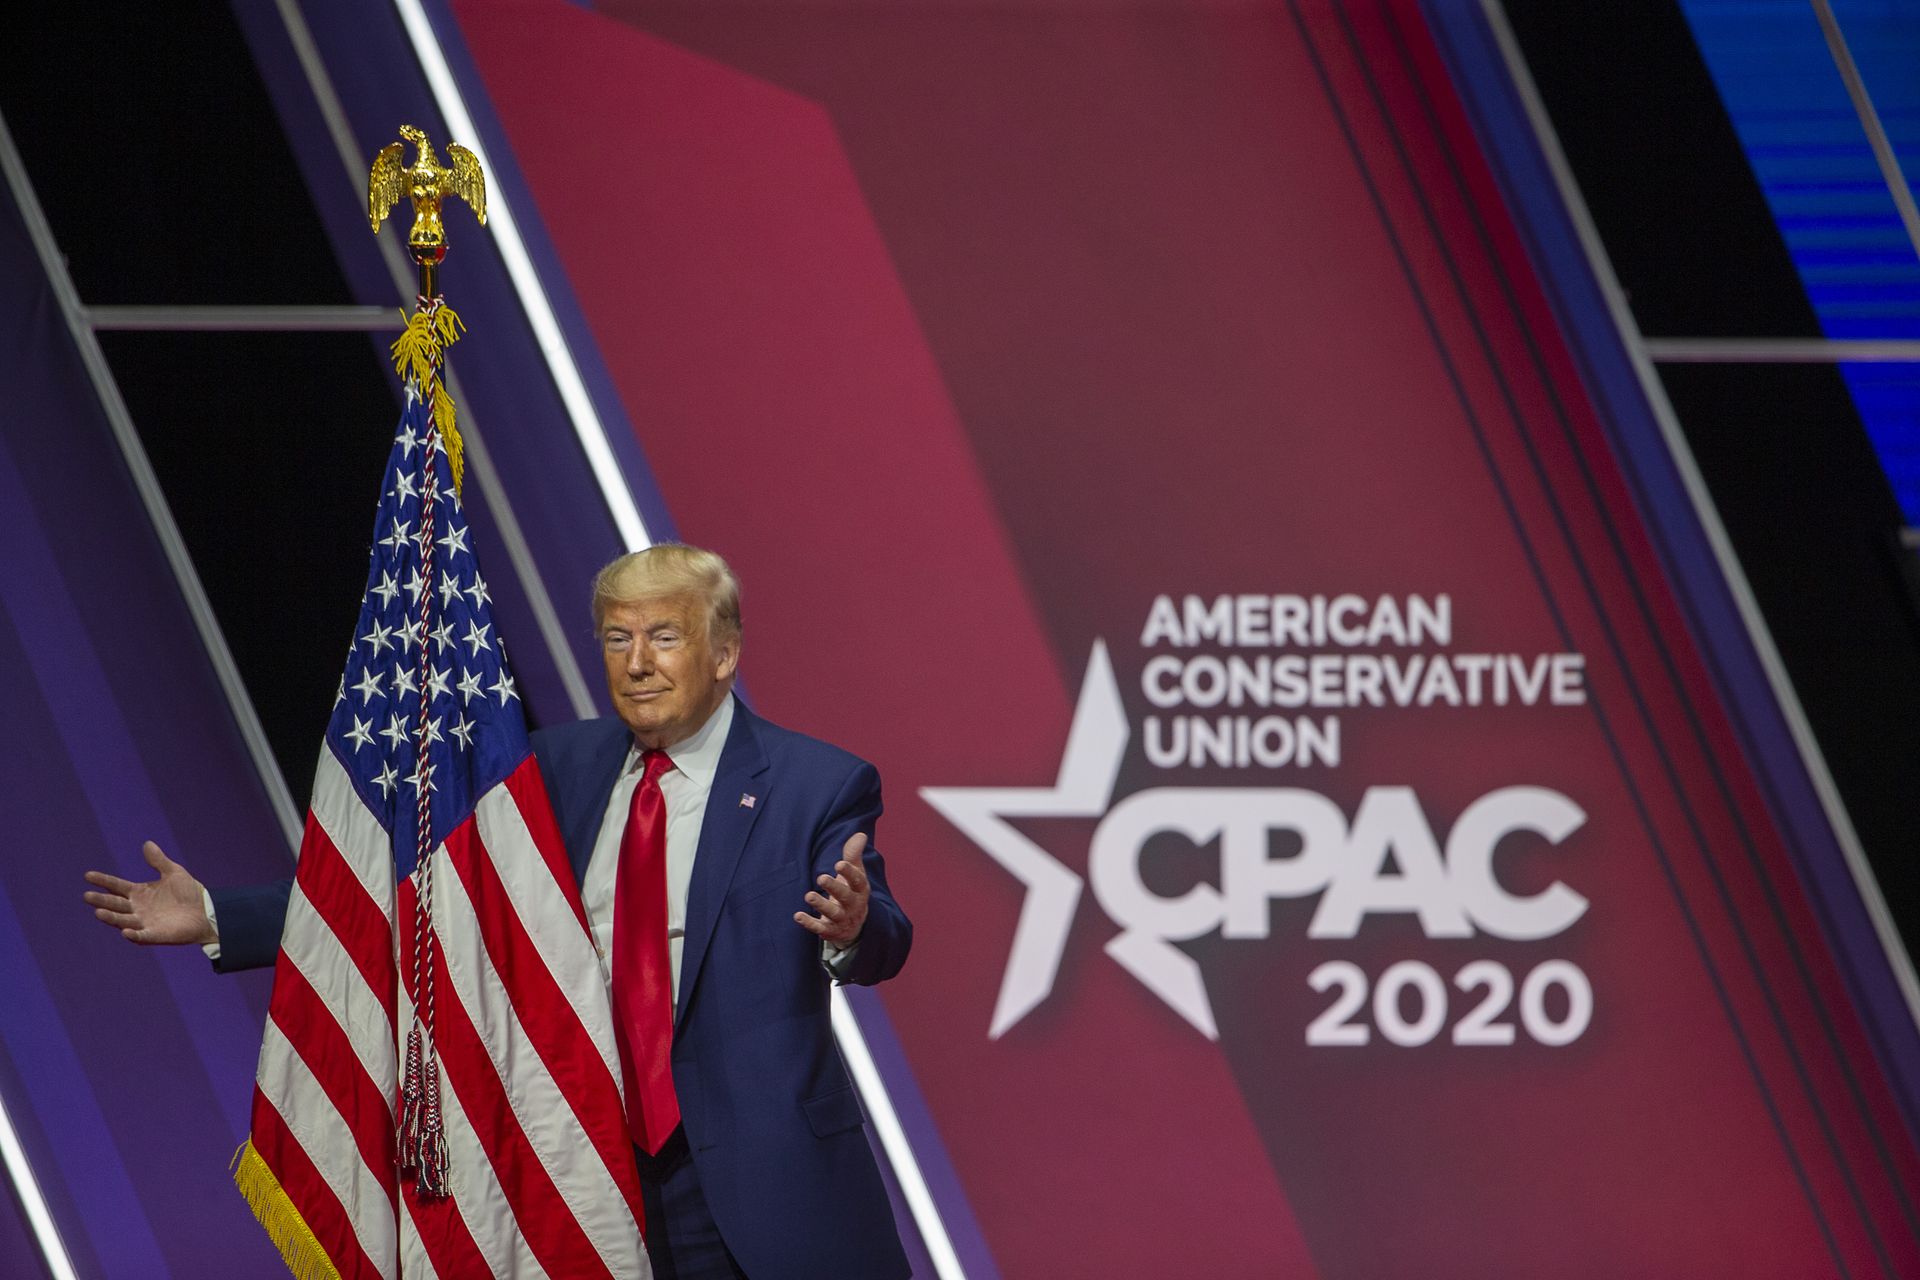 Cpac 2020 Speakers / 29qh7fd7c Rzpm / Cpac 2021 speakers will be posted